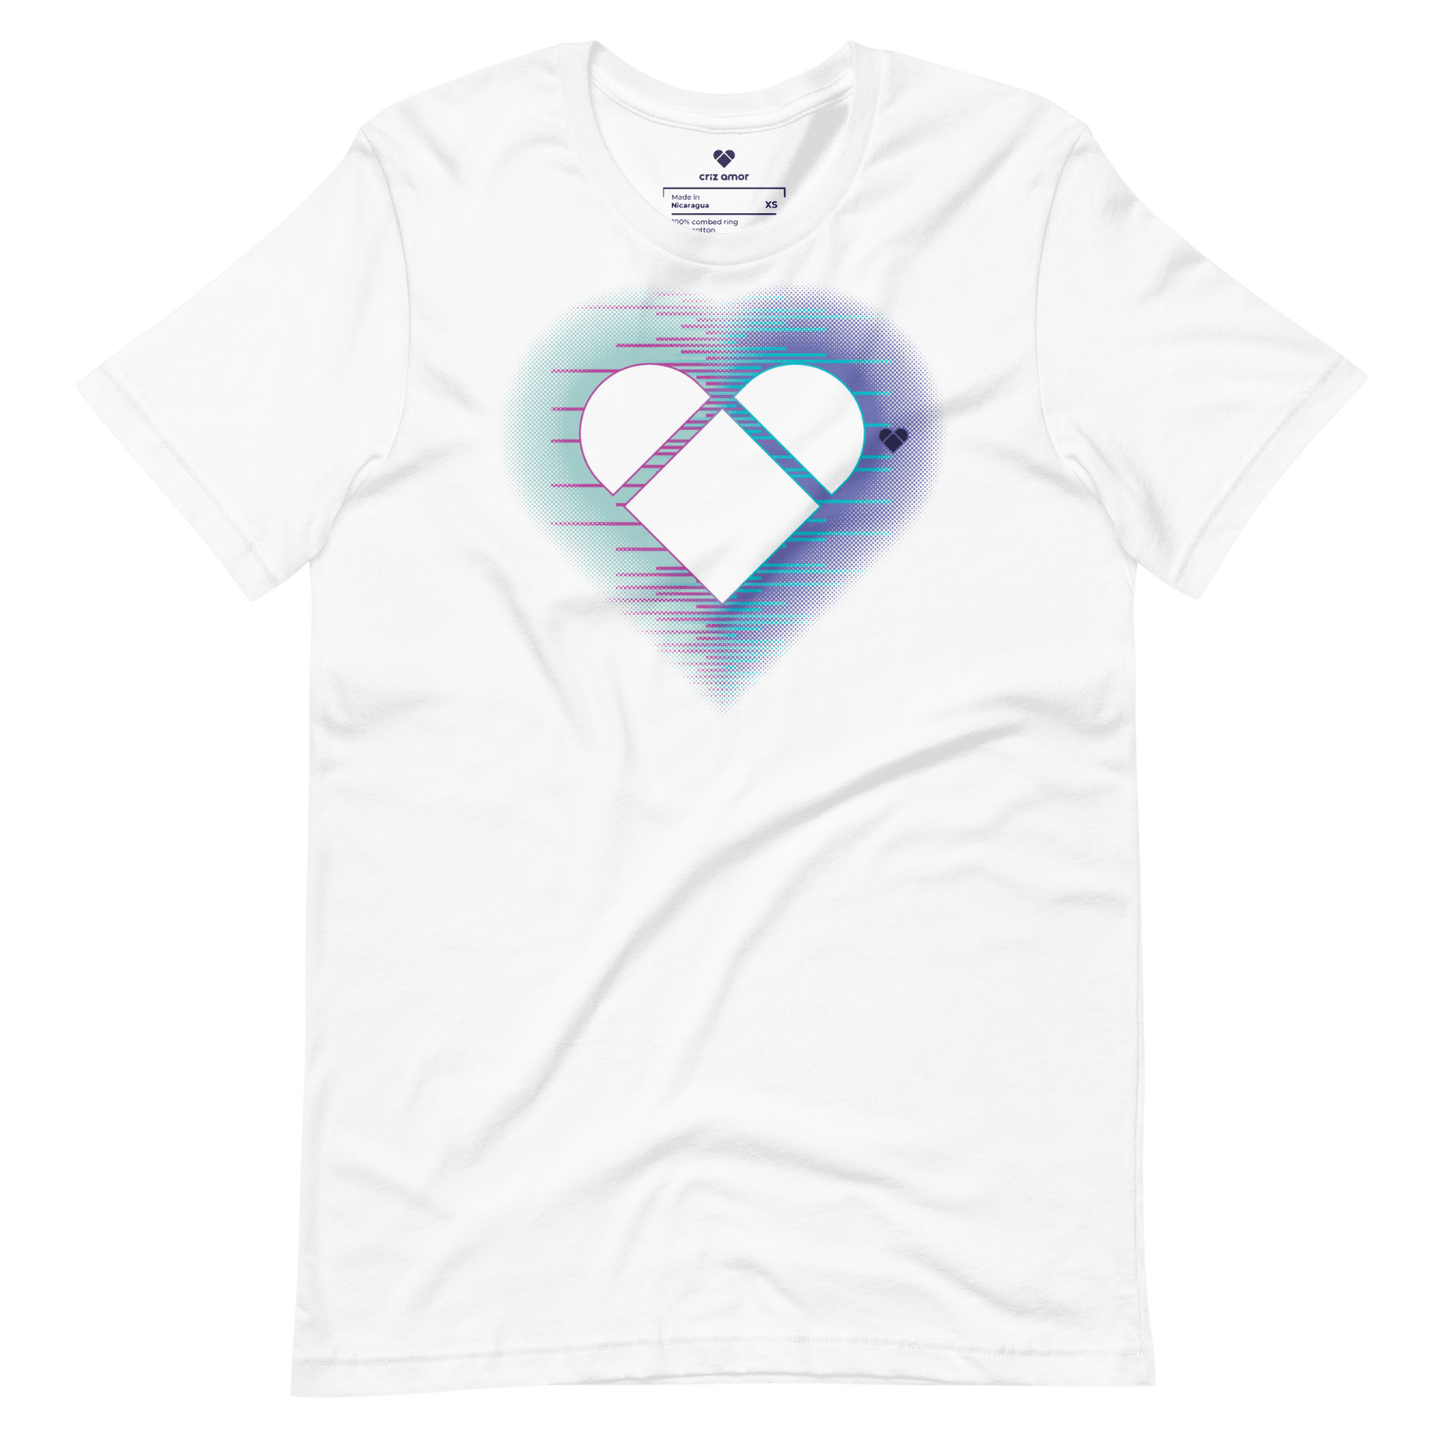 Front view of CRiZ AMOR's Amor Dual White Tee with heart logo and colorful dual aura